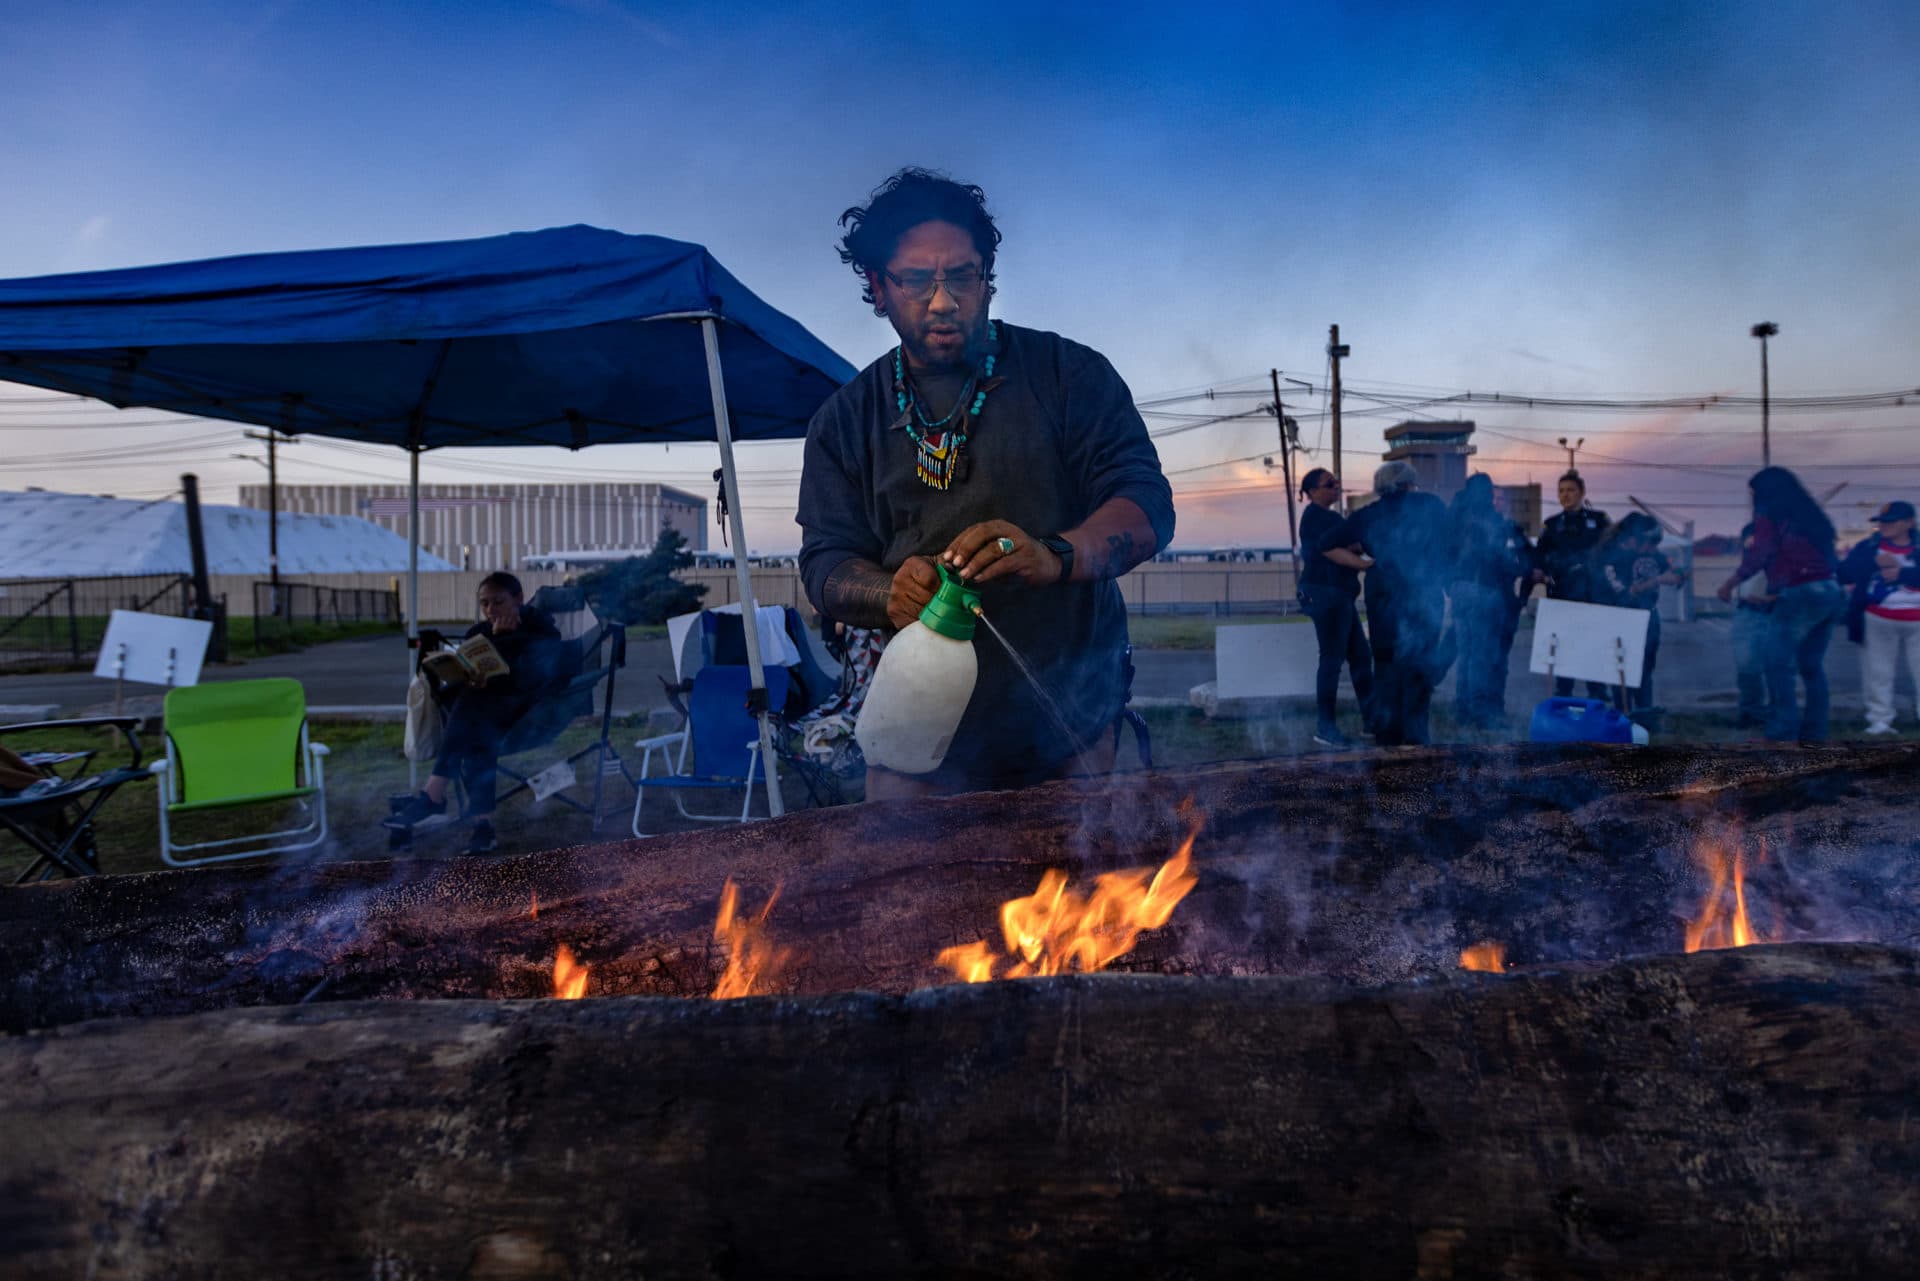 Dylan Lach, of the Chappaquiddick Wompanoag tribe, sprays water onto the sides of the mishoon to keep them from burning. (Jesse Costa/WBUR)